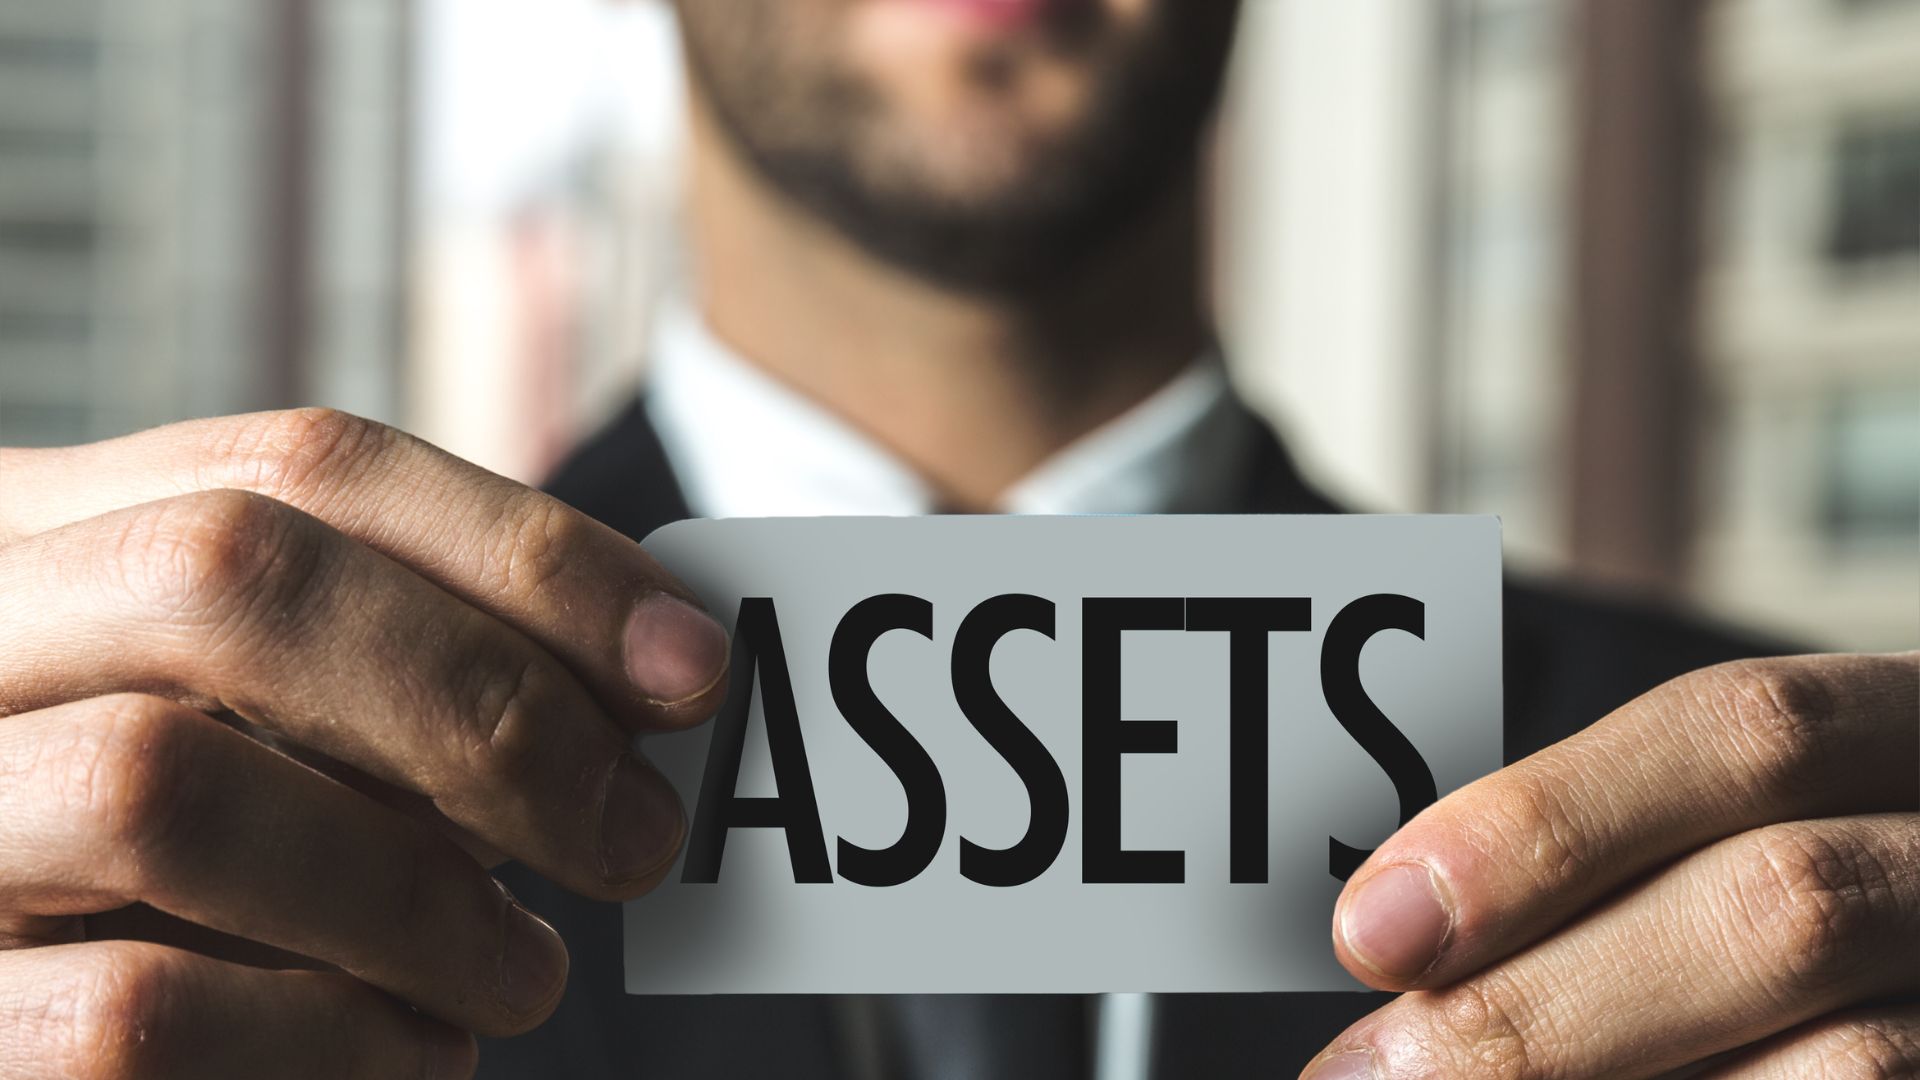 Effective Asset Management: 5 Tips to Help You Get Best ROI.